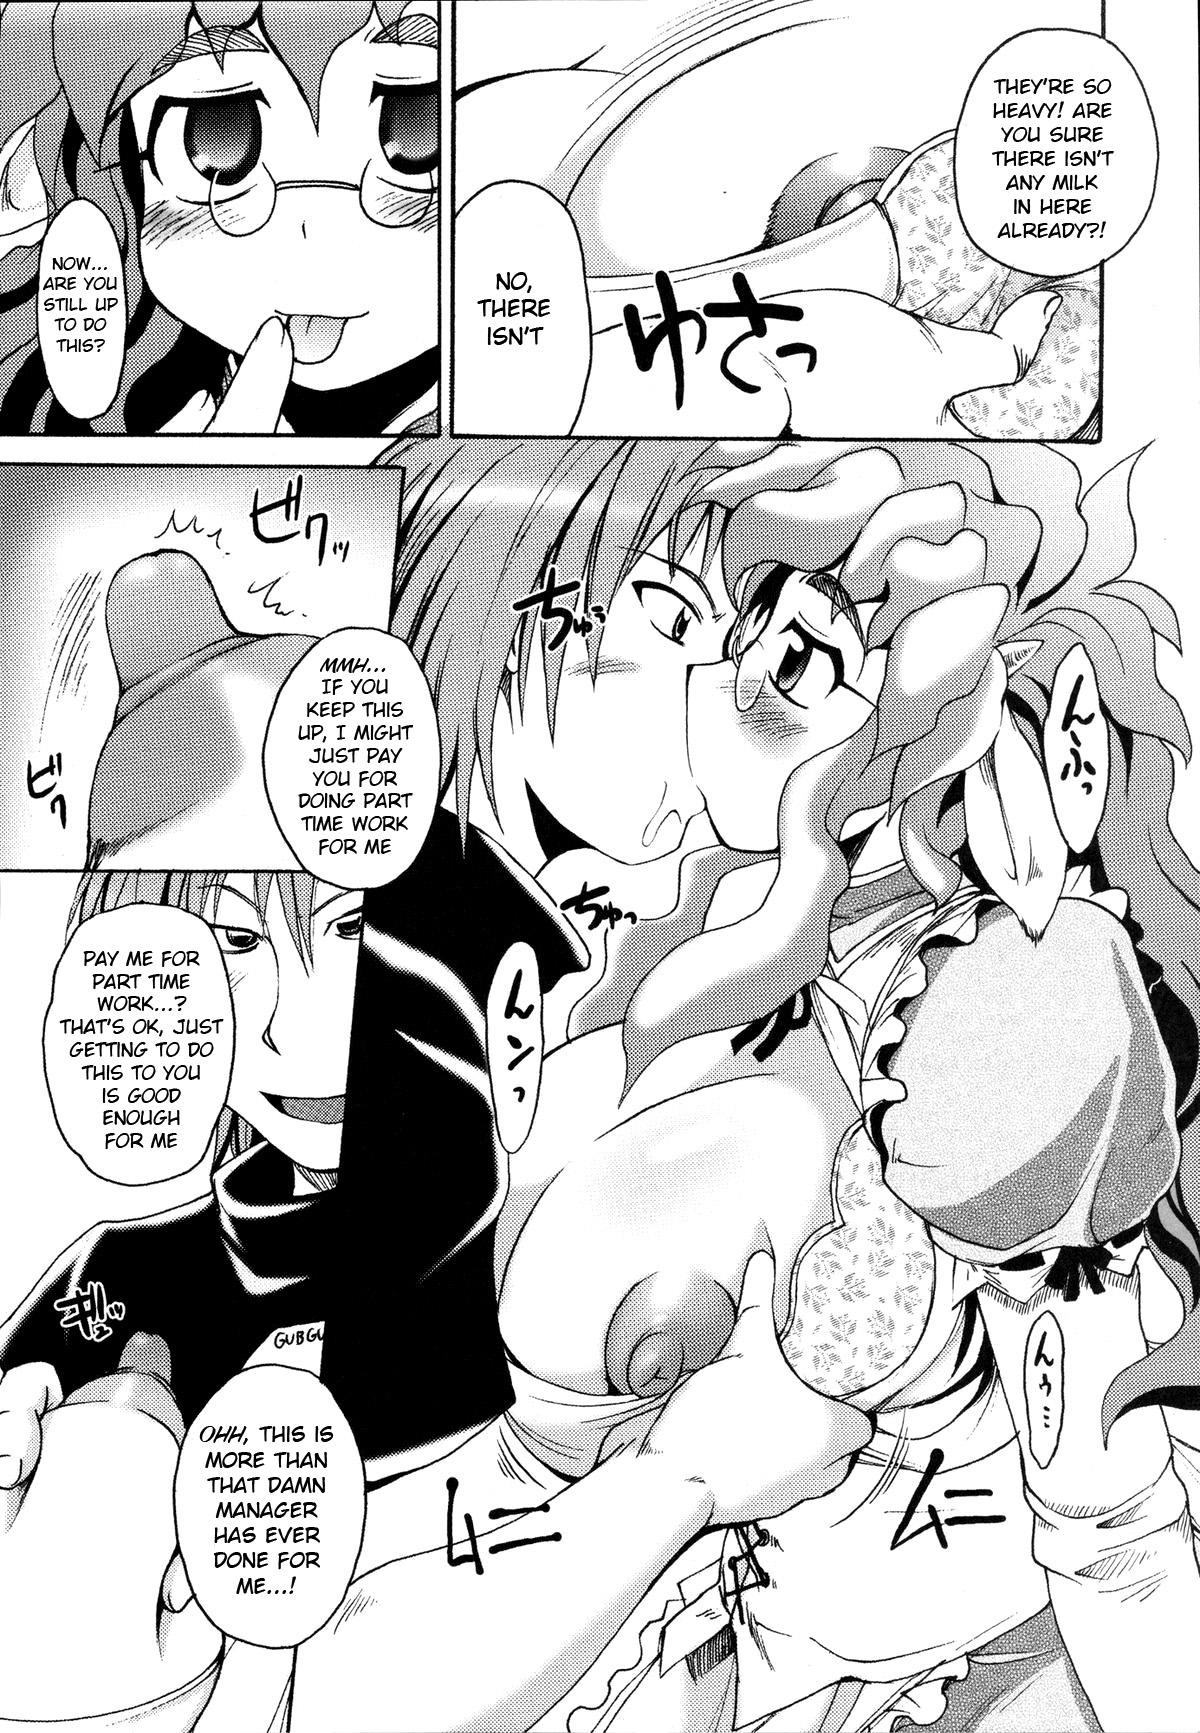 Pene Mei At Once - Original Humiliation - Page 7